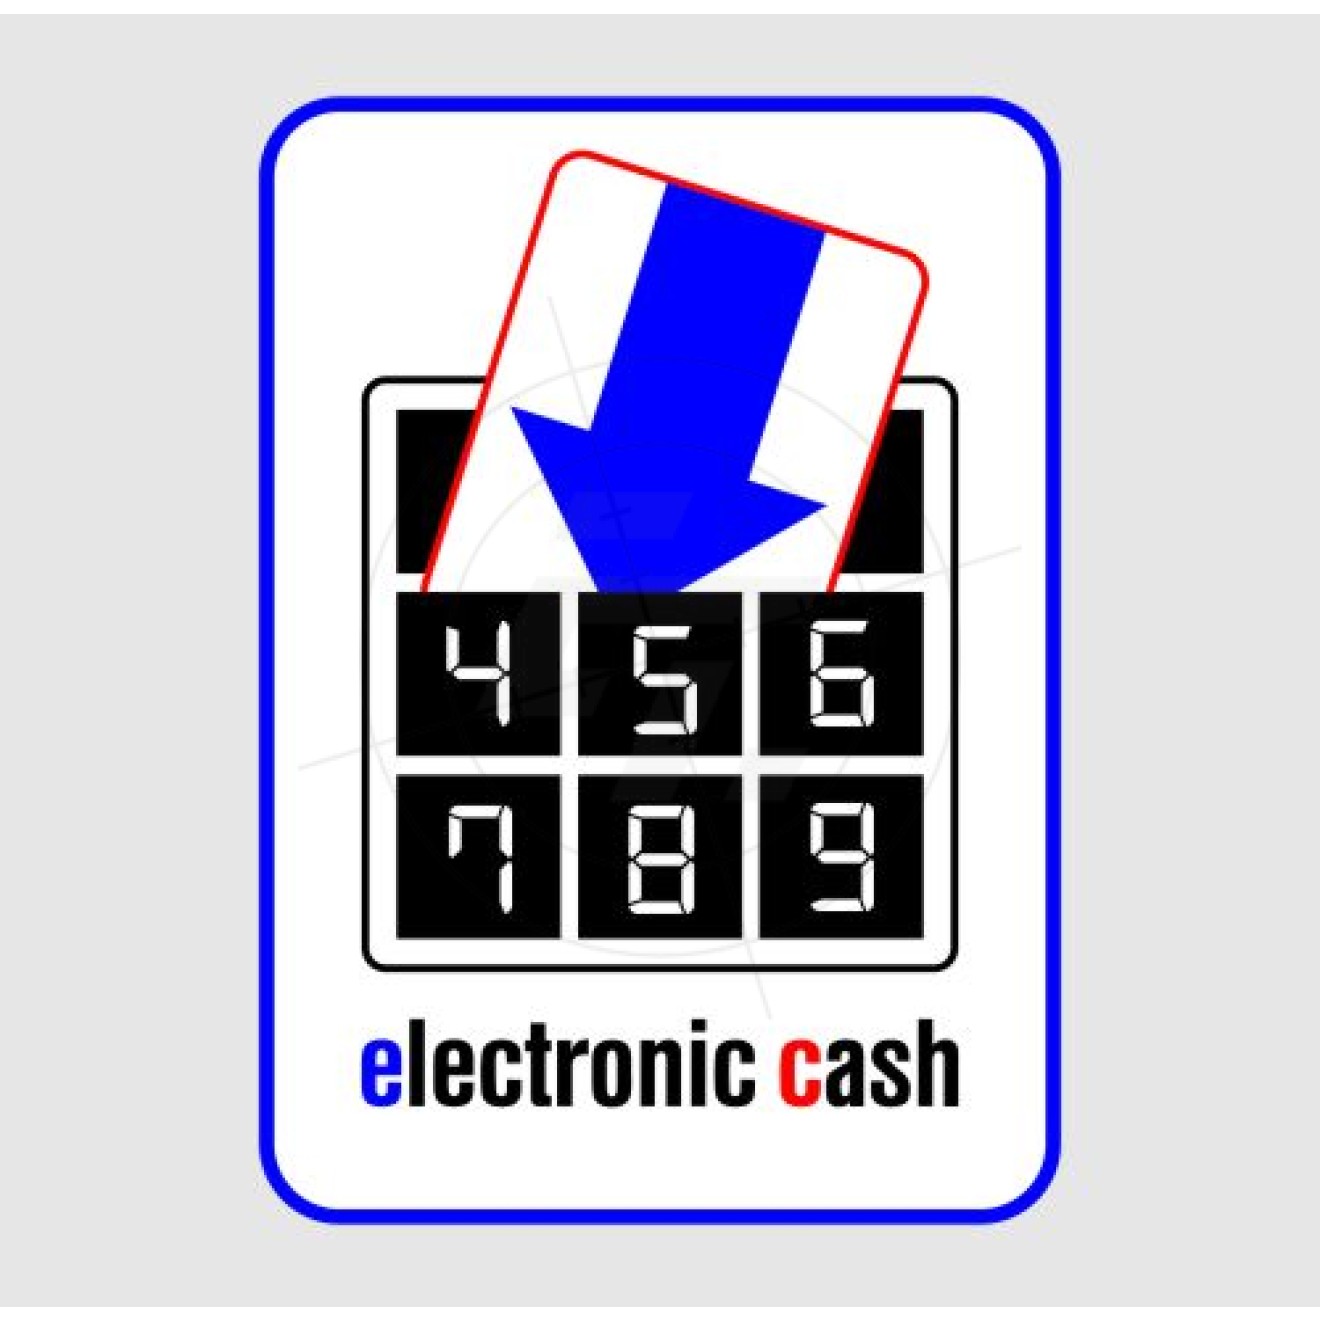 Sticker EC card payment with PIN